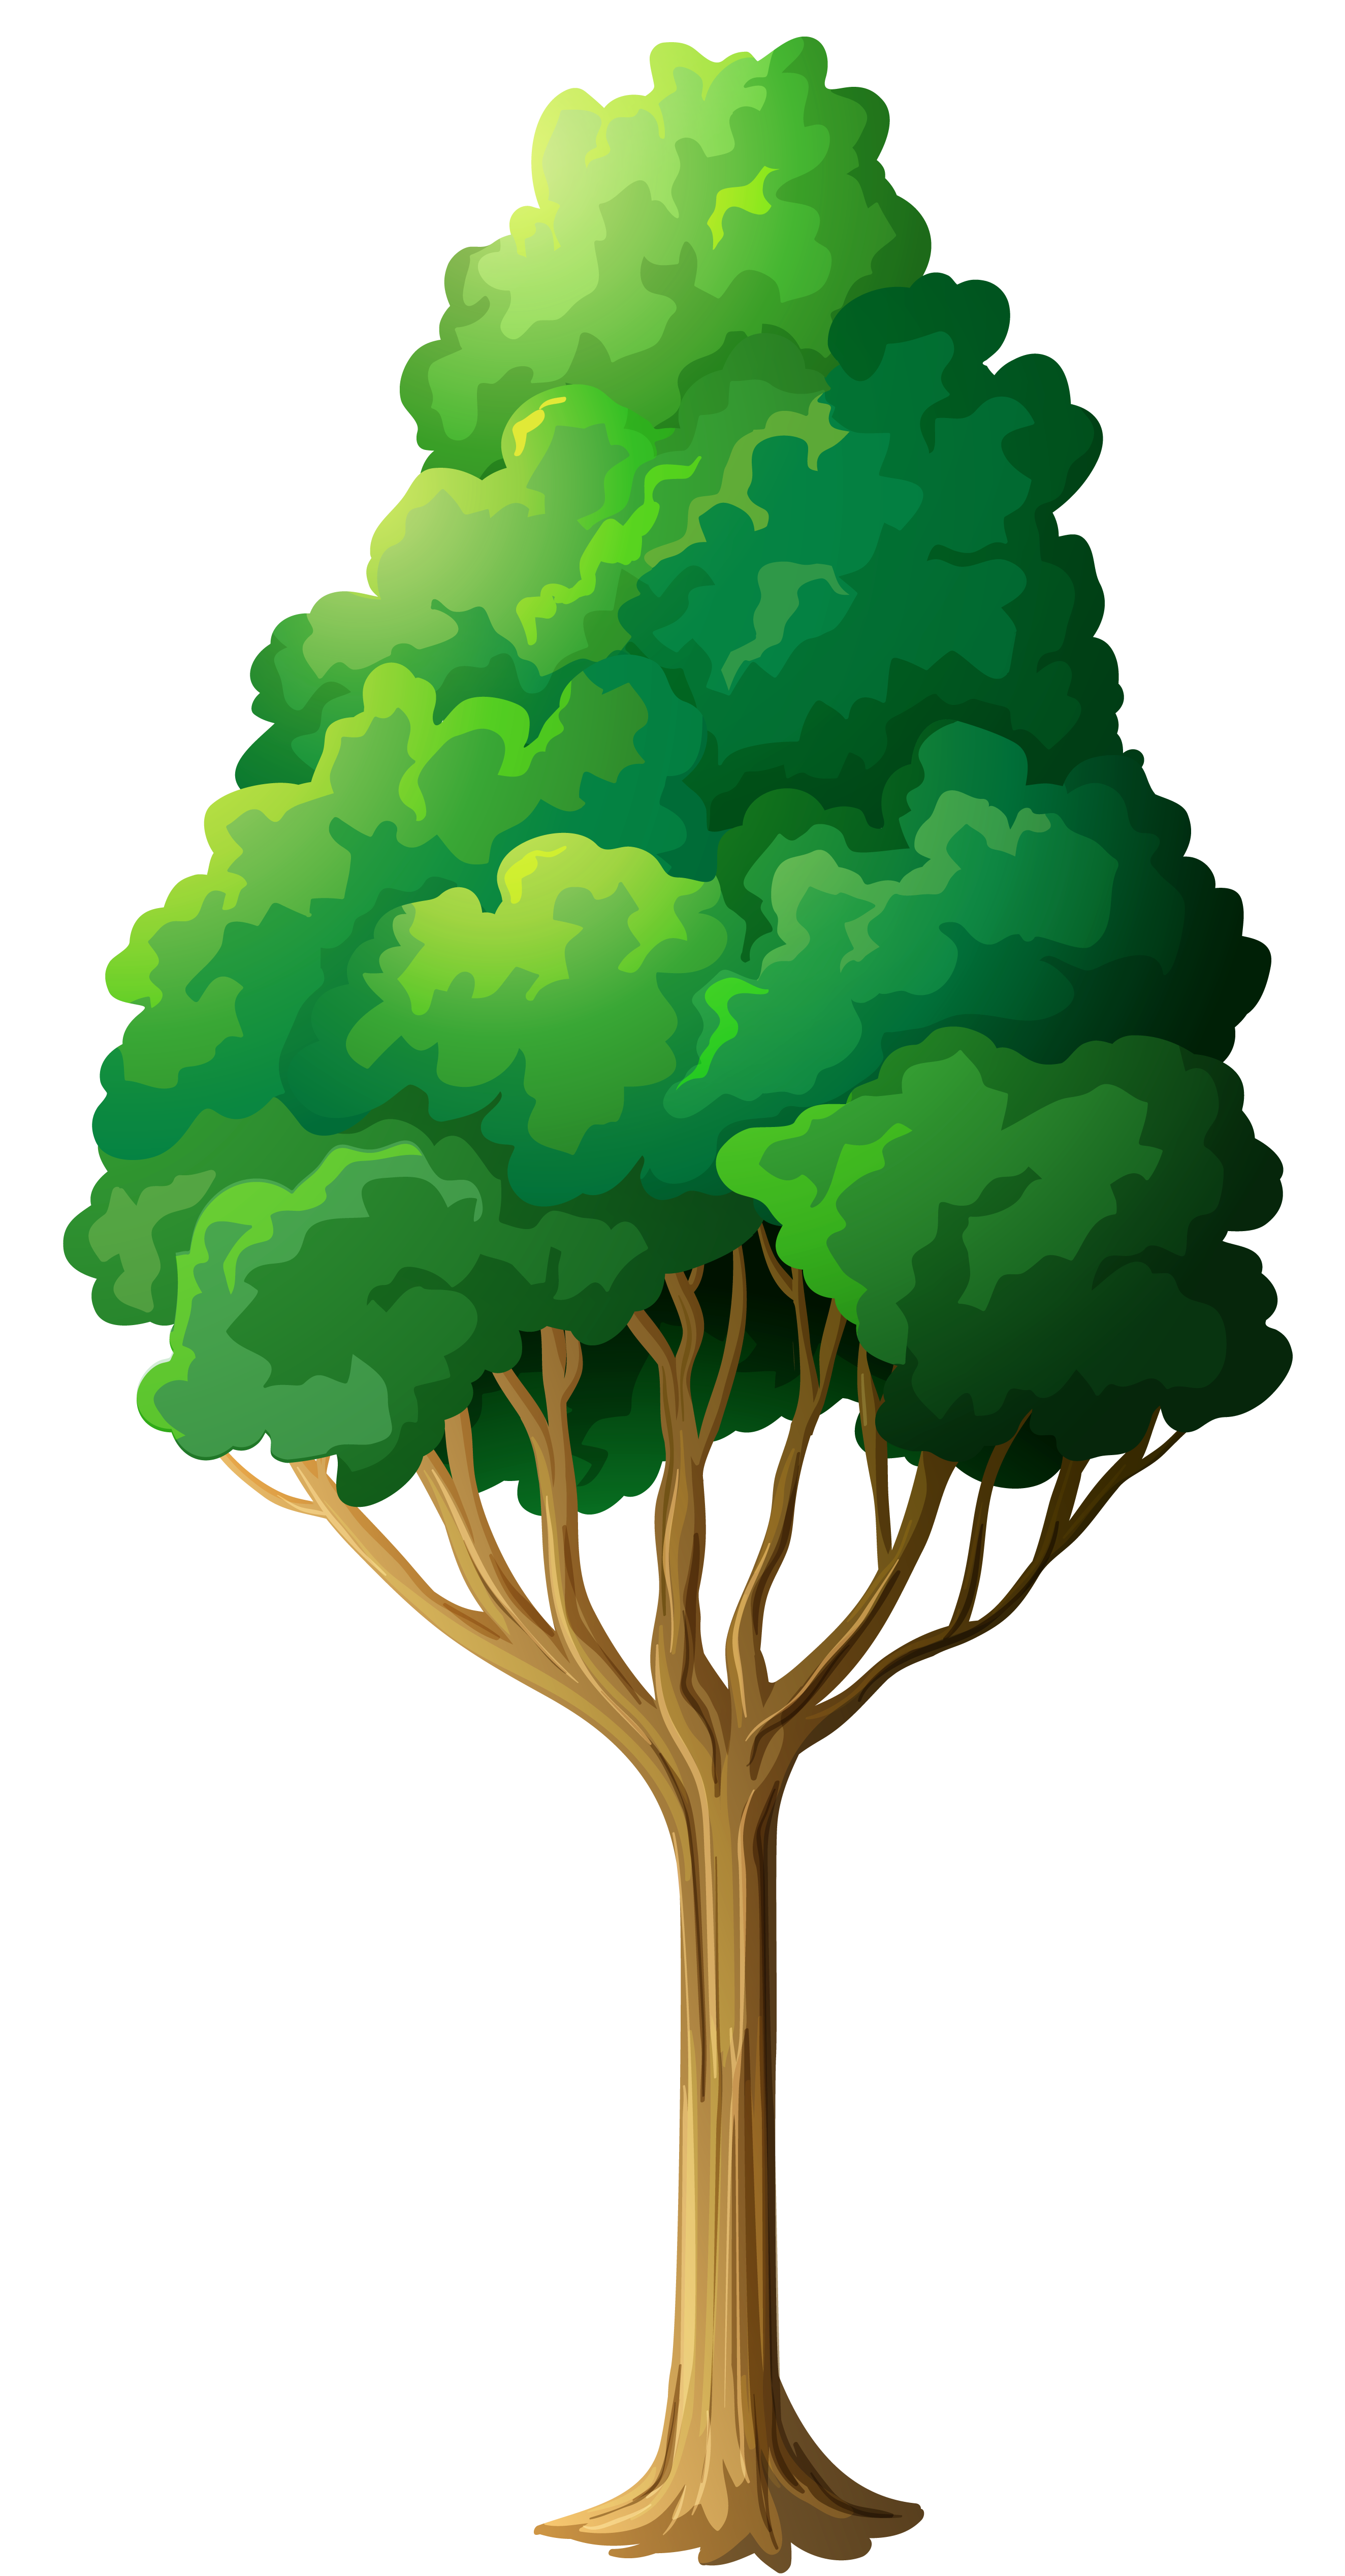 23 Tree Png Free Cliparts That You Can Download To You Computer And